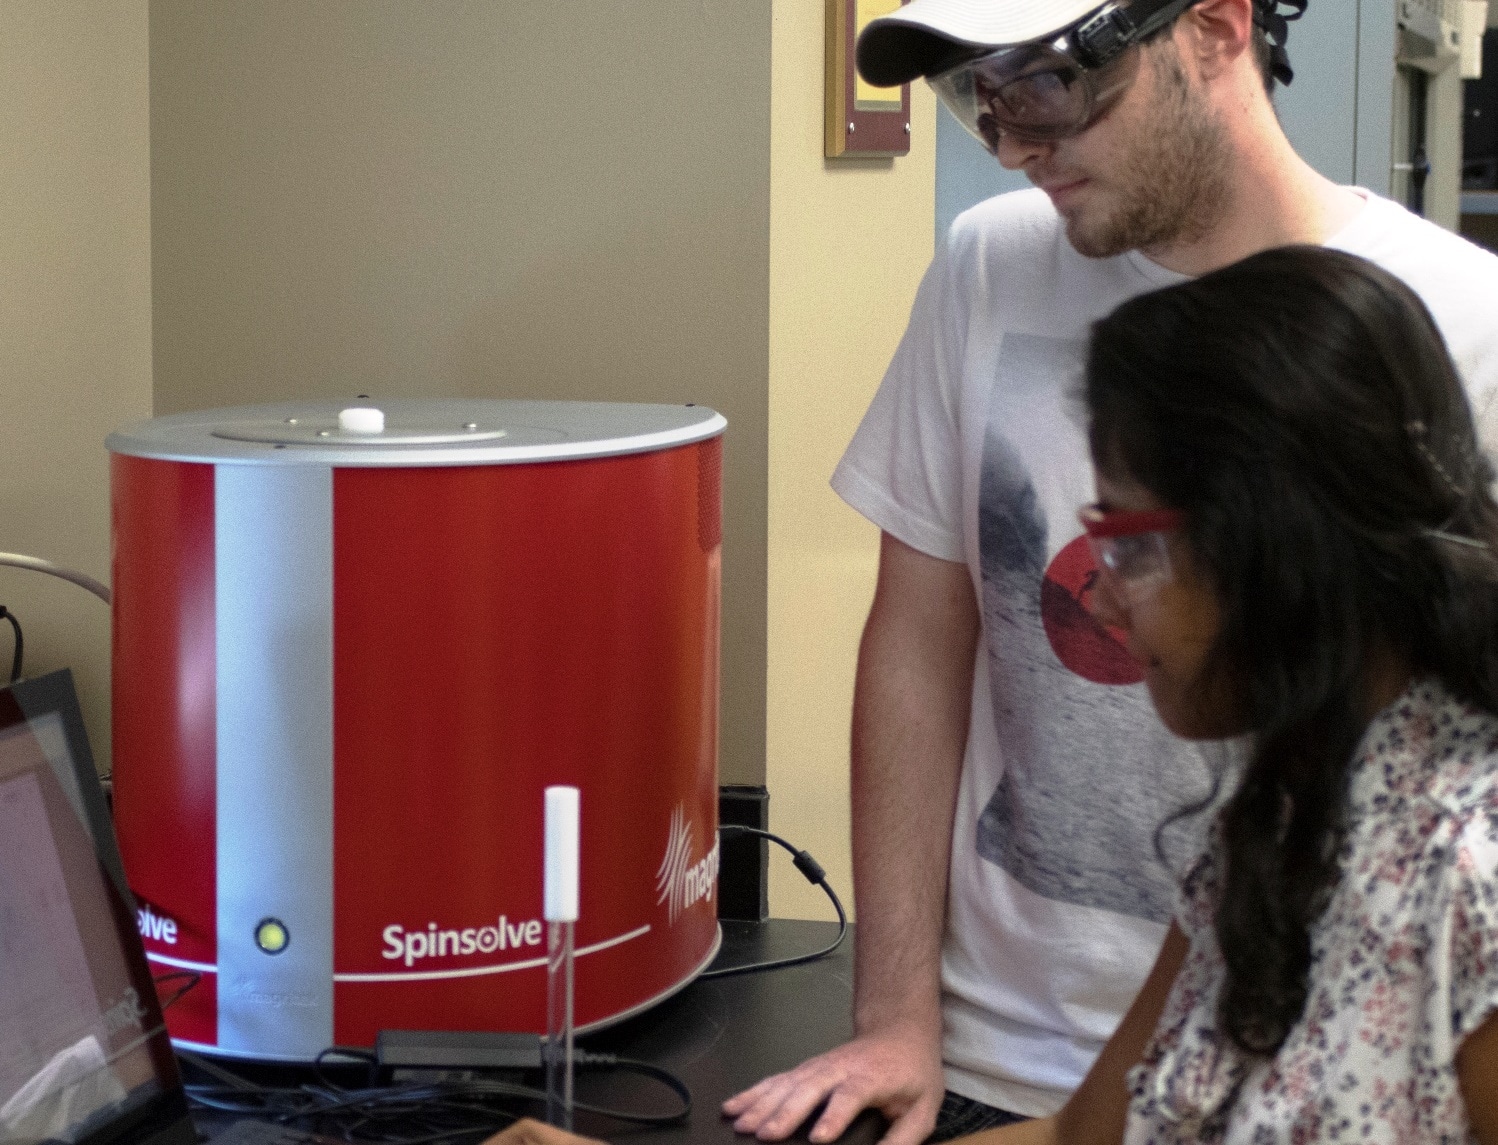 Dr. Nawarathne uses the SpinSolve to demonstrate NMR to her students